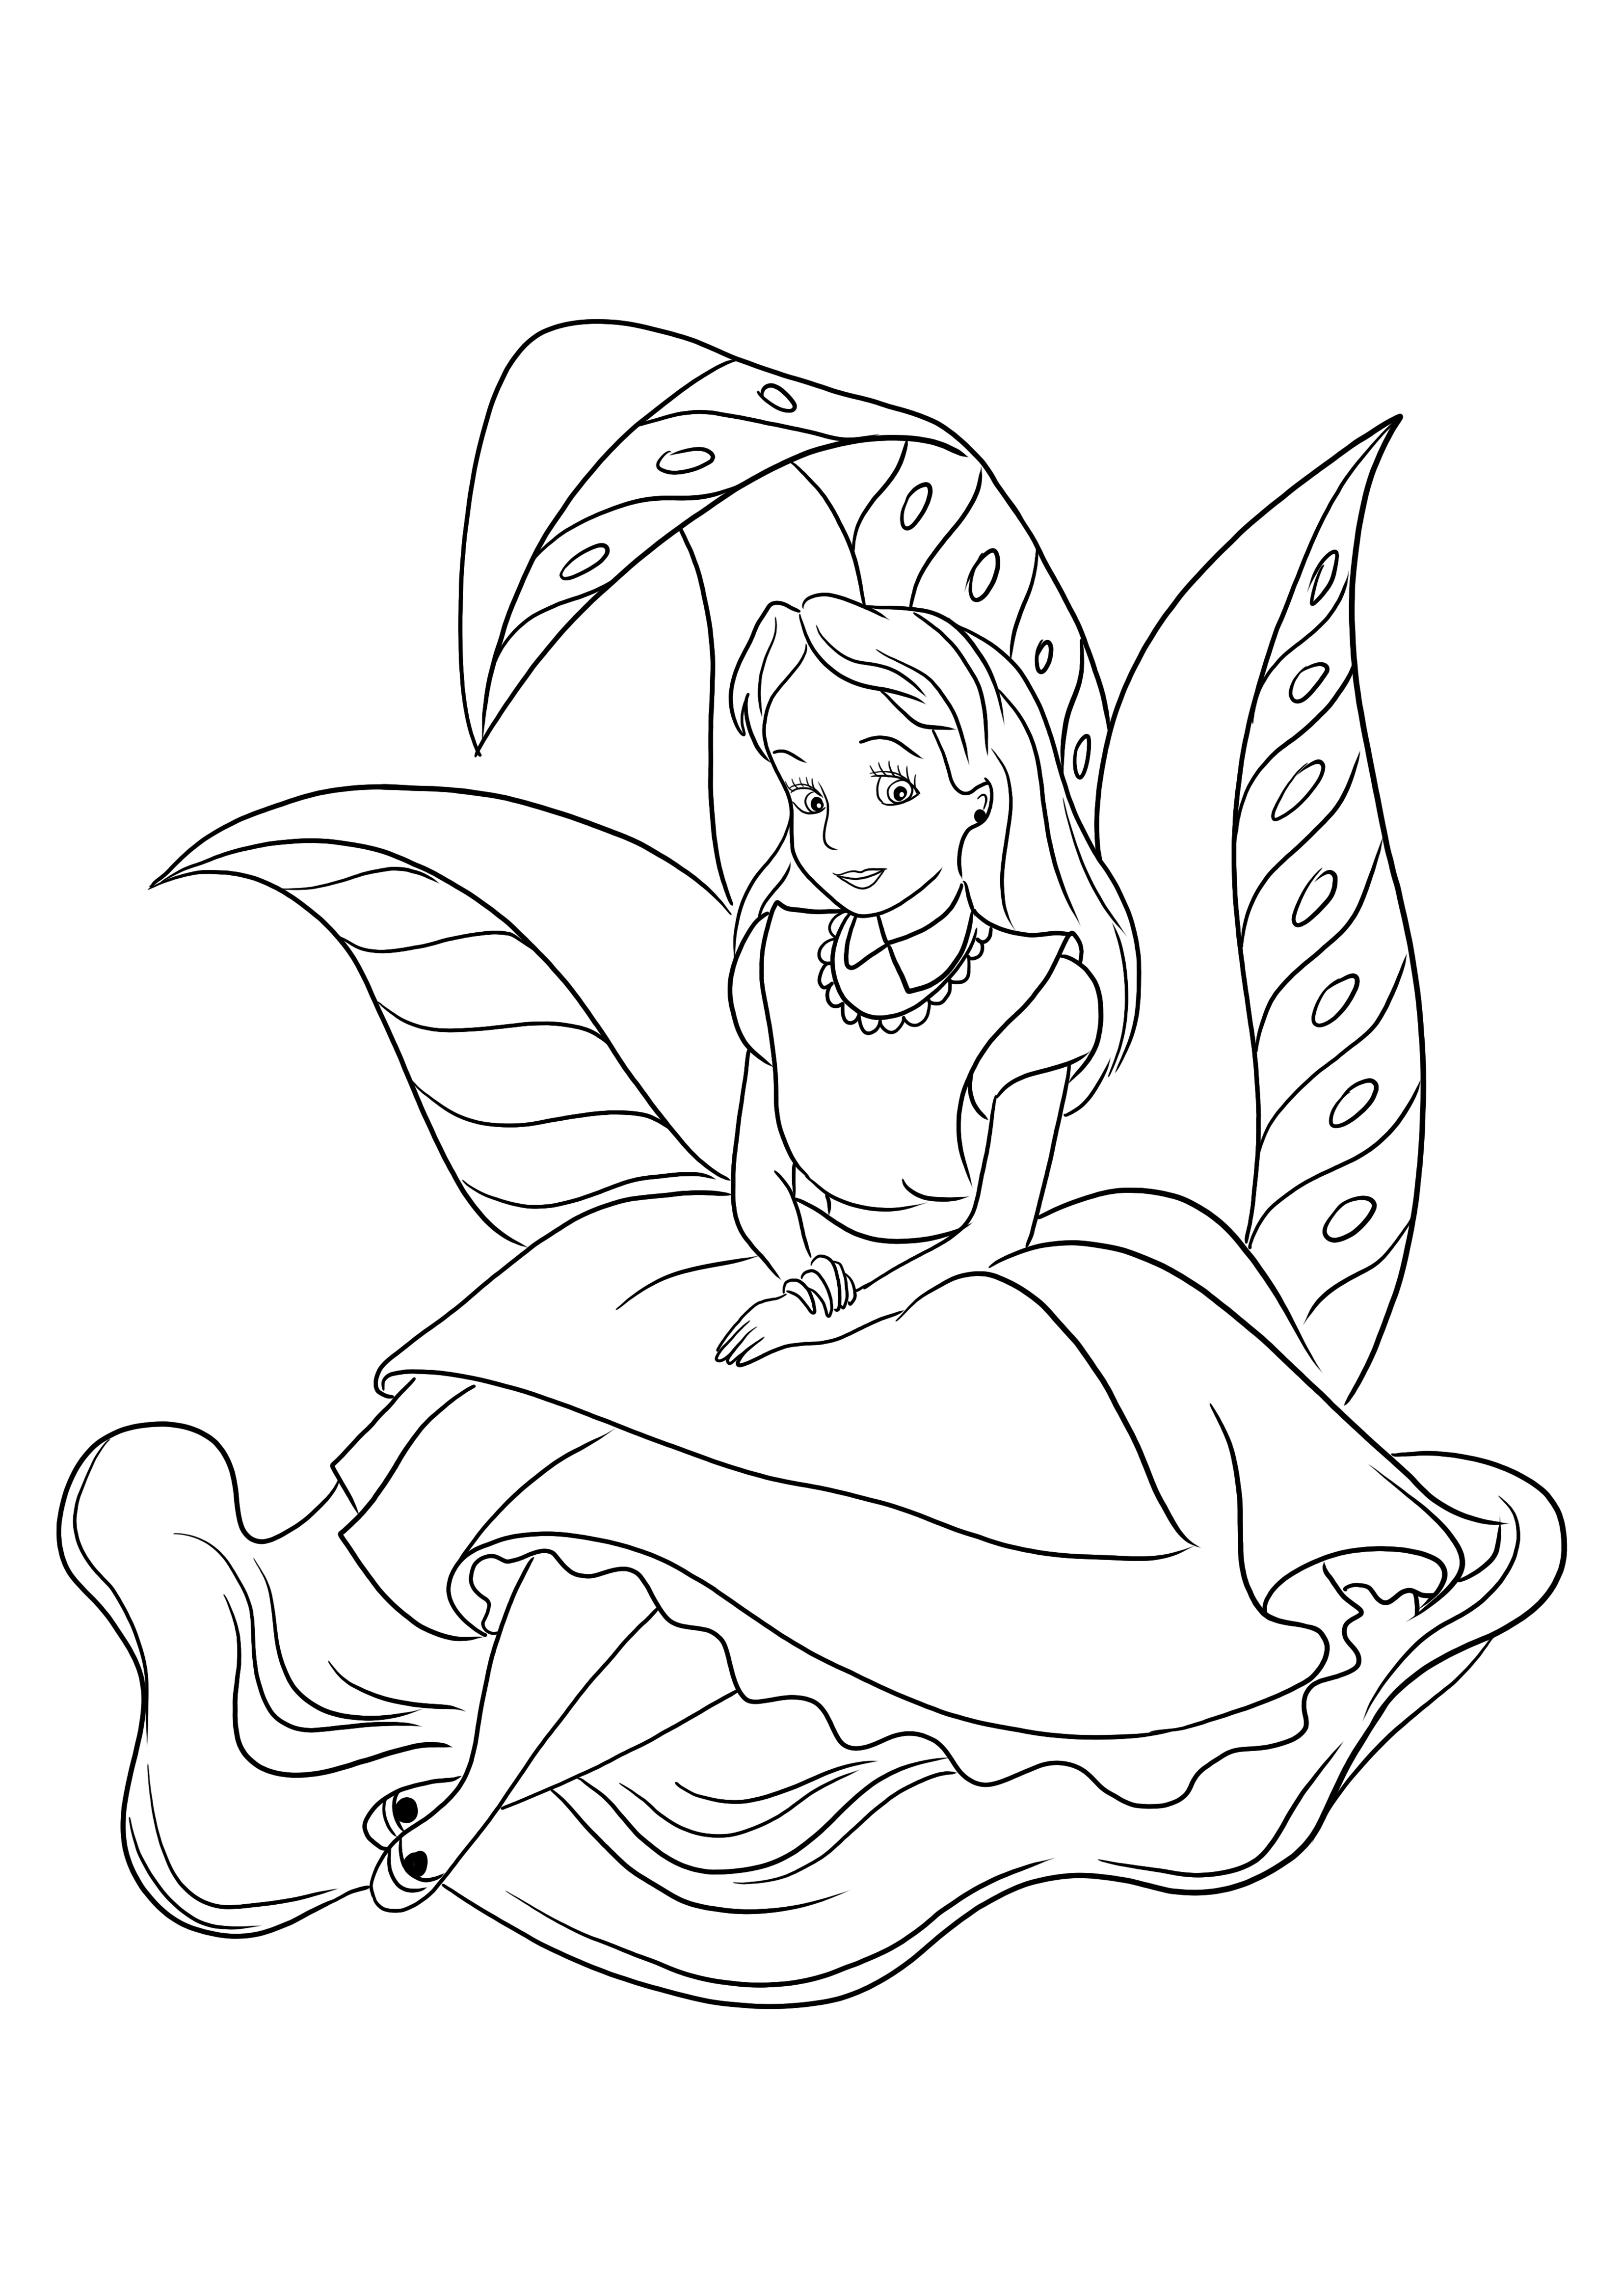 Here is a free coloring picture of Alice sitting on a giant leaf to ...